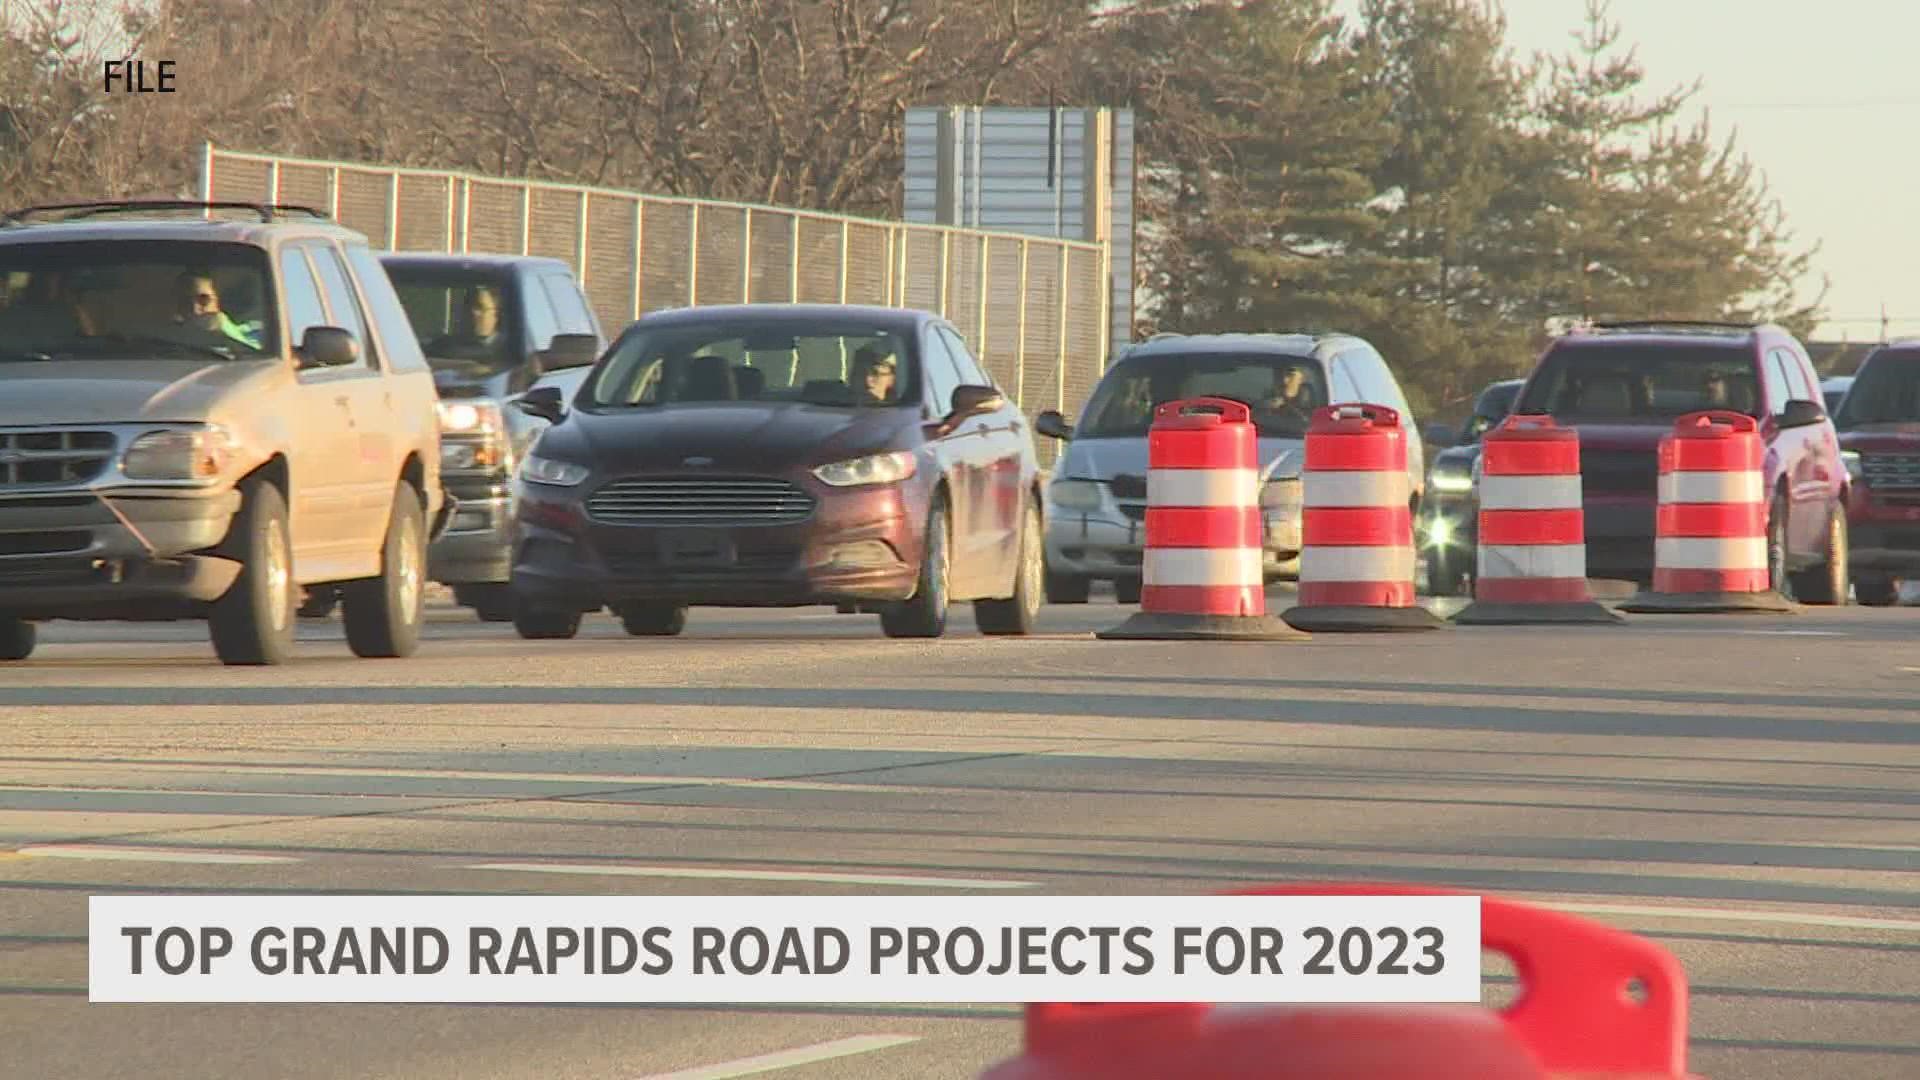 The top road projects for 2023 in West Michigan have been announced! Here's what to expect come later this year.